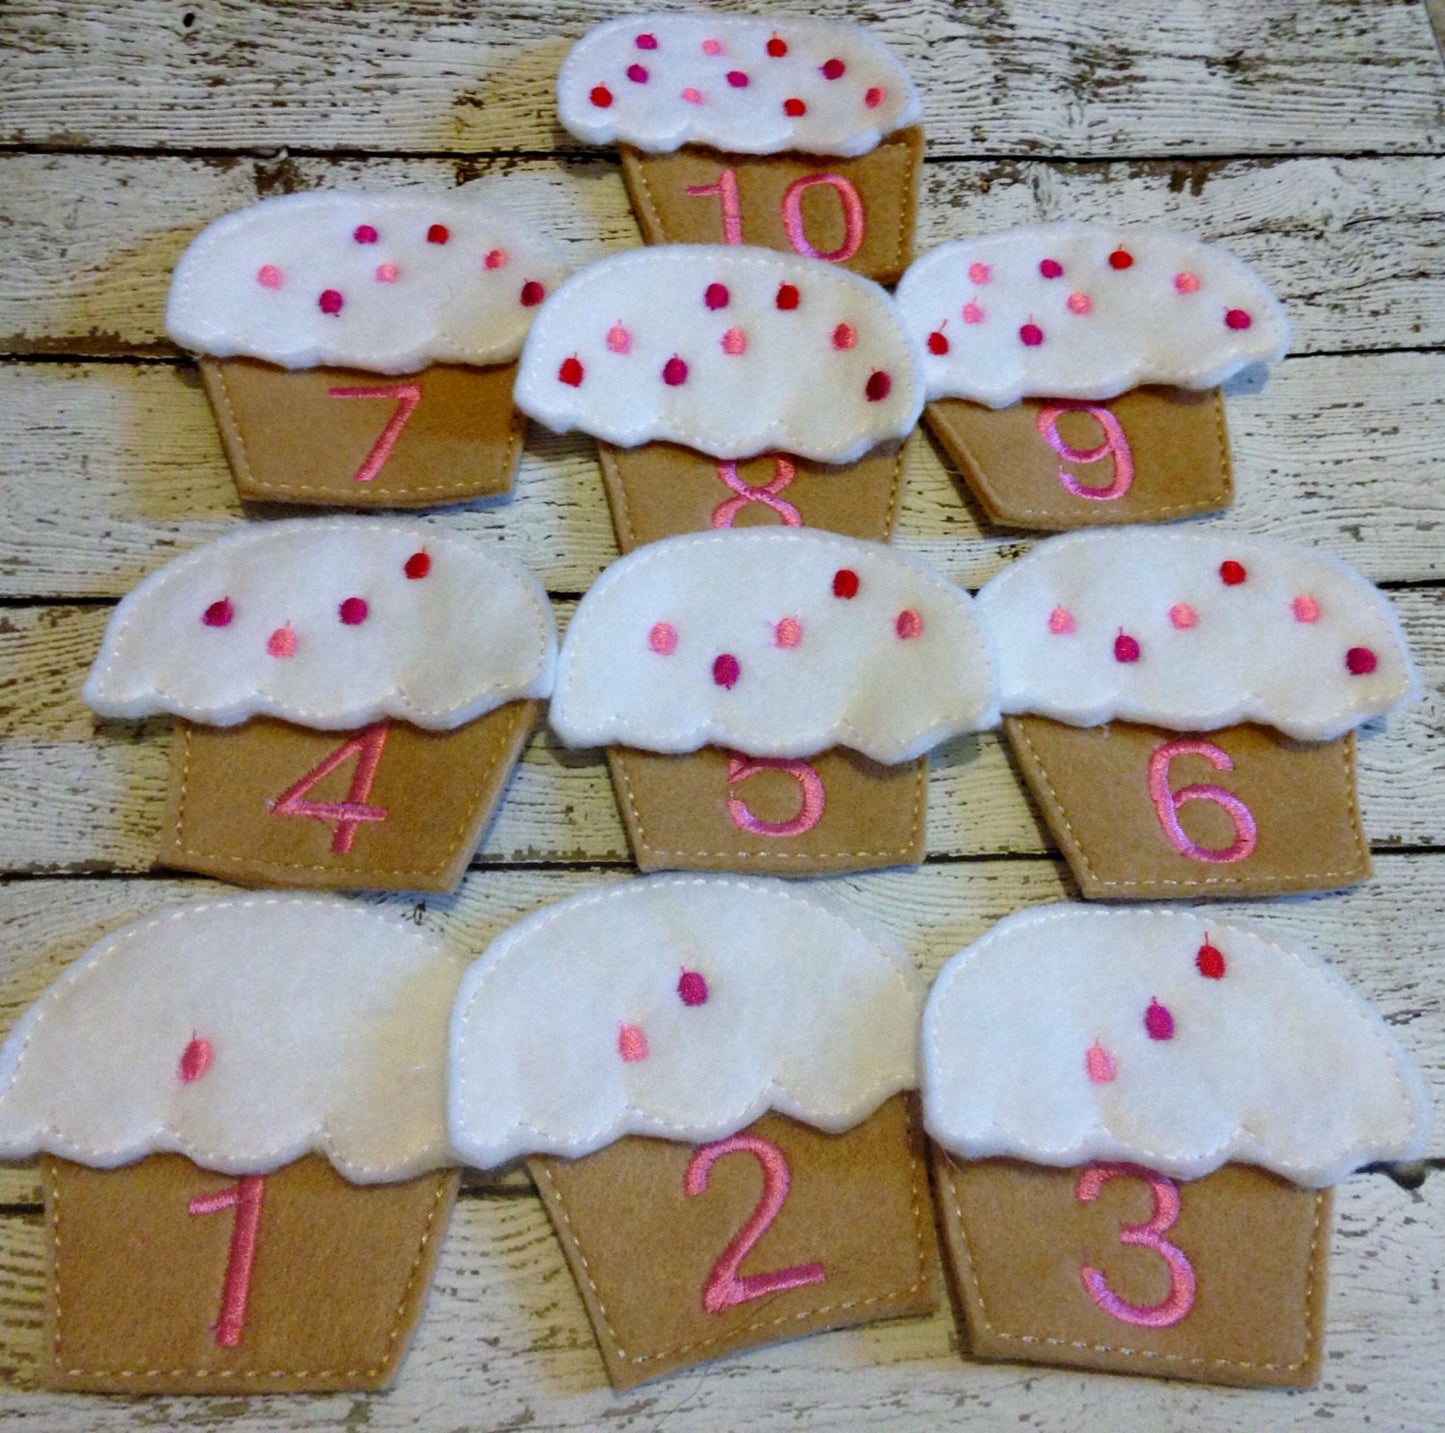 Felt counting cupcakes activity set for teaching counting and number recognition in the classroom or at home